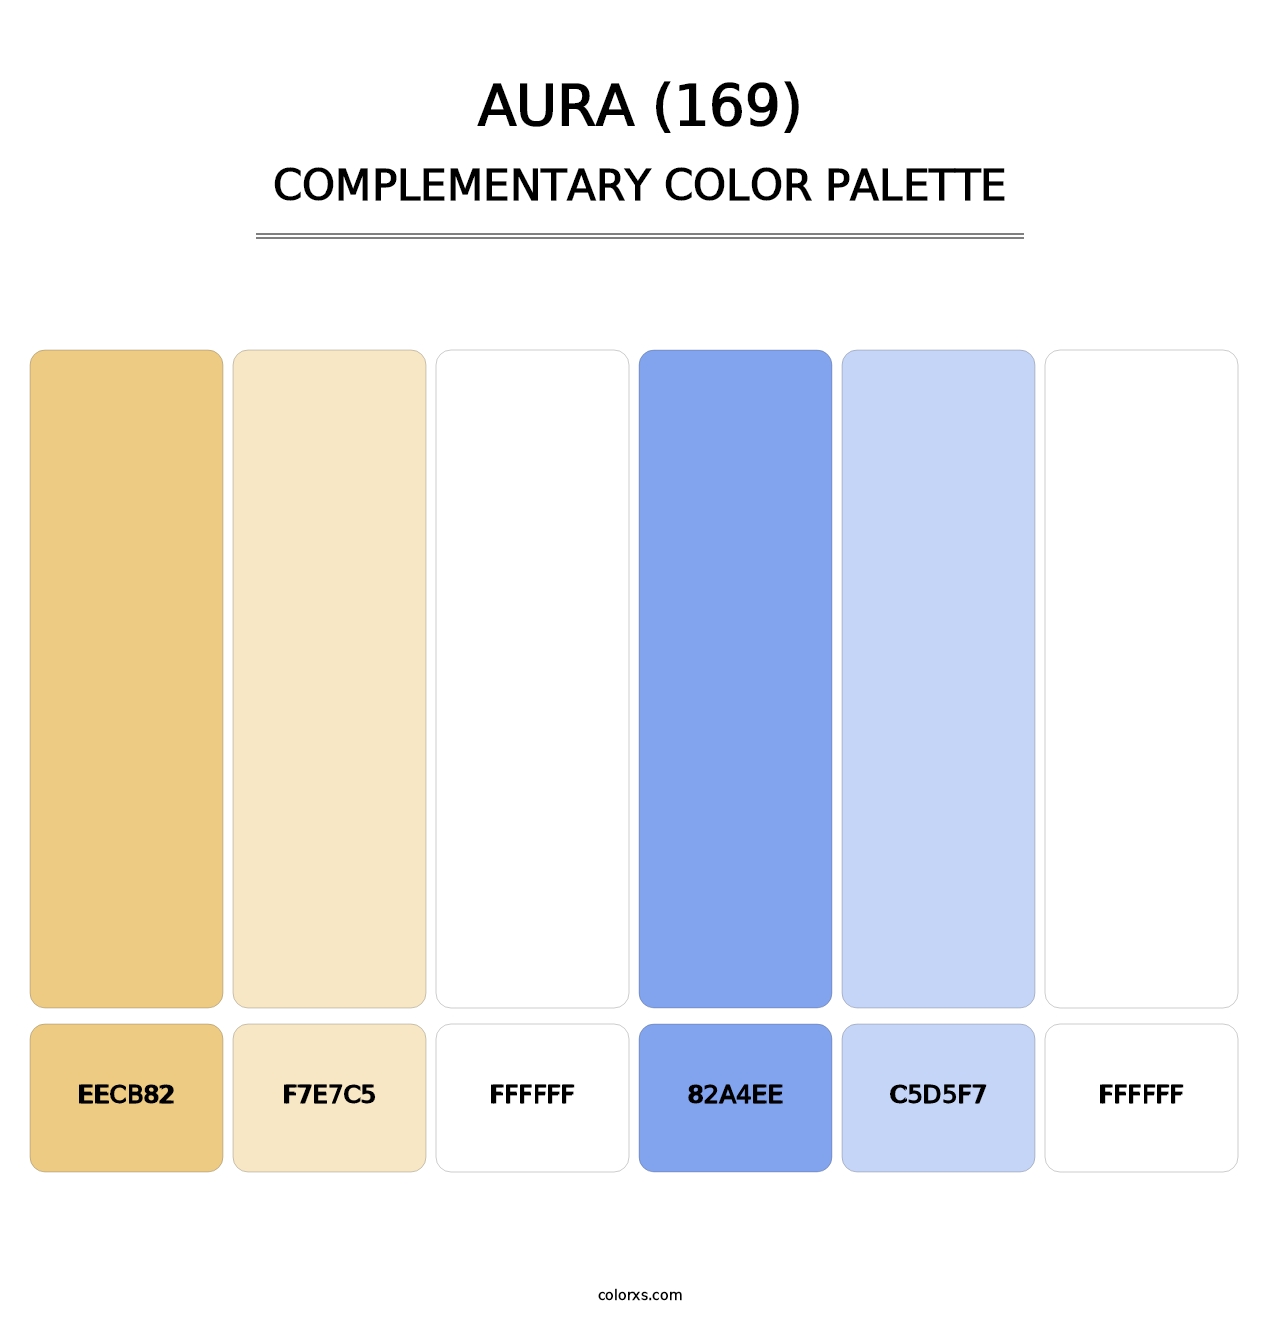 Aura (169) - Complementary Color Palette